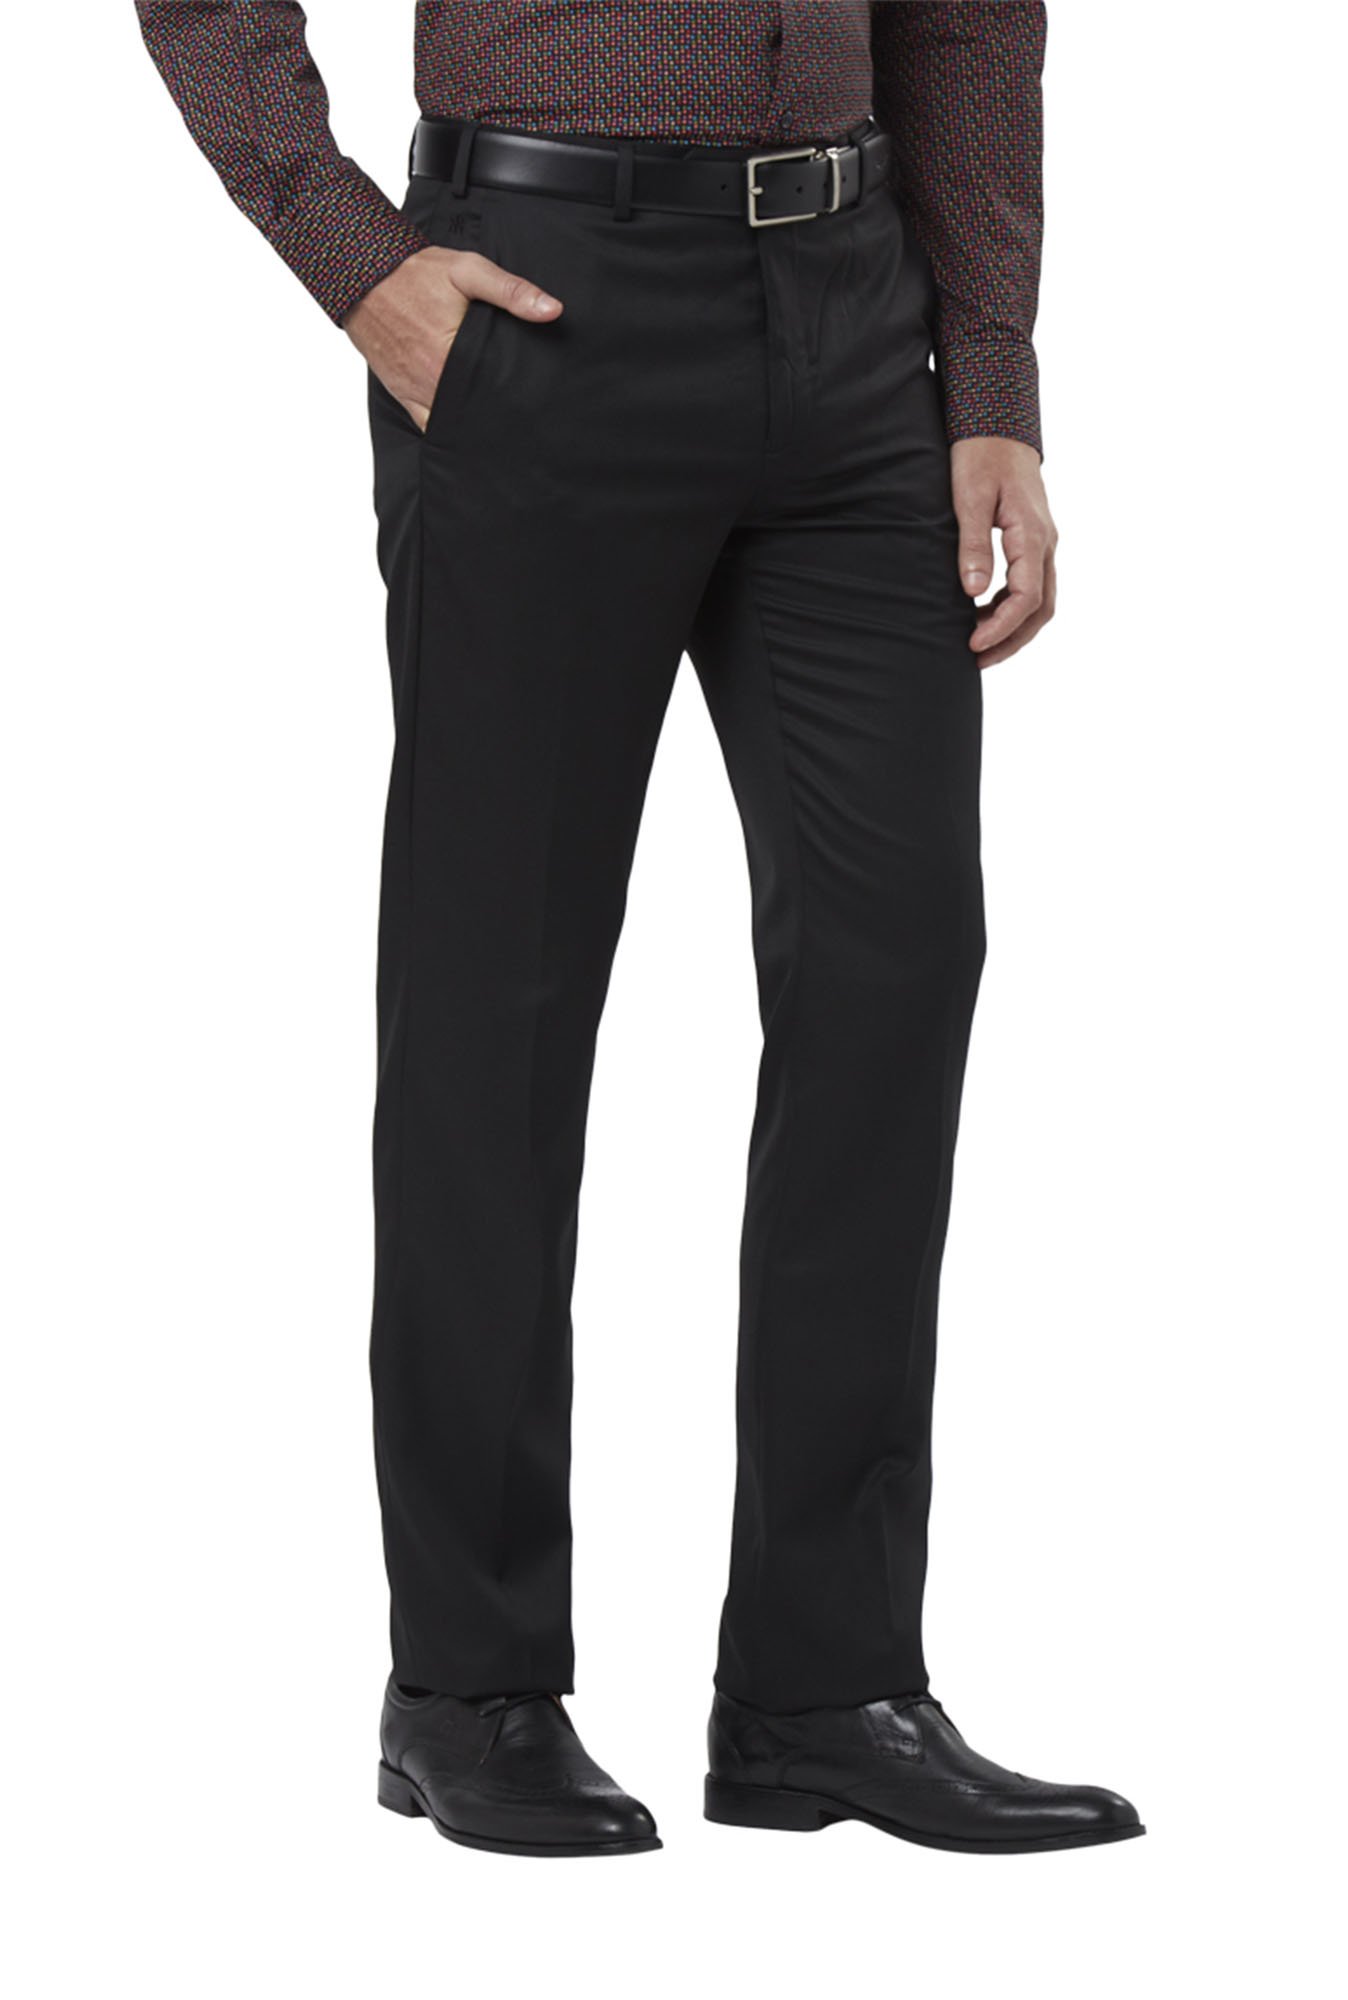 55 OFF on Raymond Men Brown Contemporary Regular Fit Solid Formal Trousers  on Myntra  PaisaWapascom